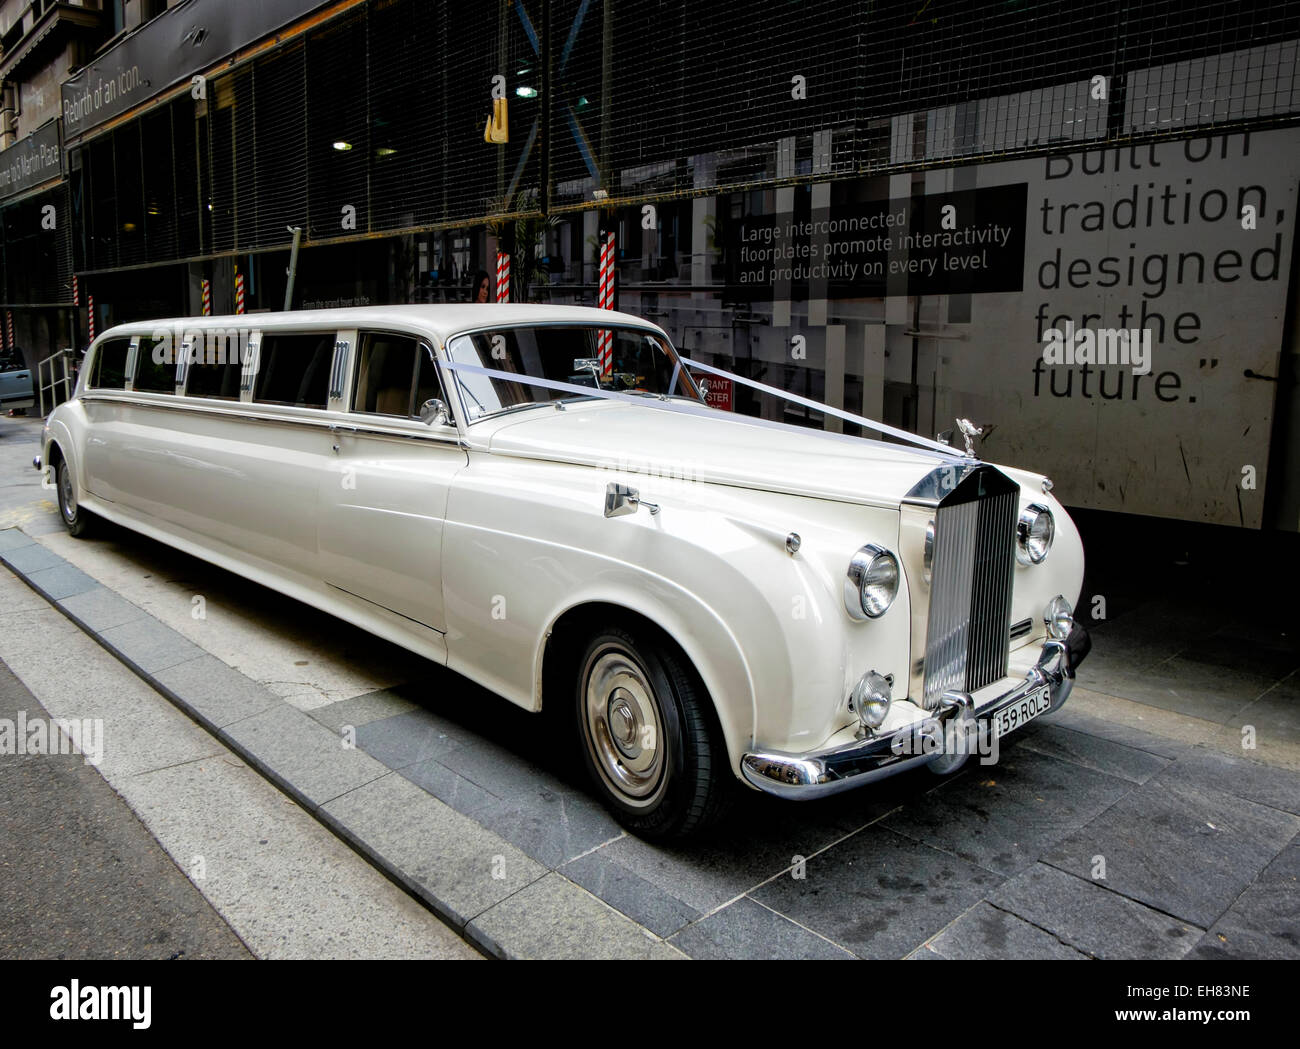 Luxury stretch limousine: A stretched Rolls Royce Phantom, used as a white wedding car; stretched limousine; modified Rolls Royce Stock Photo